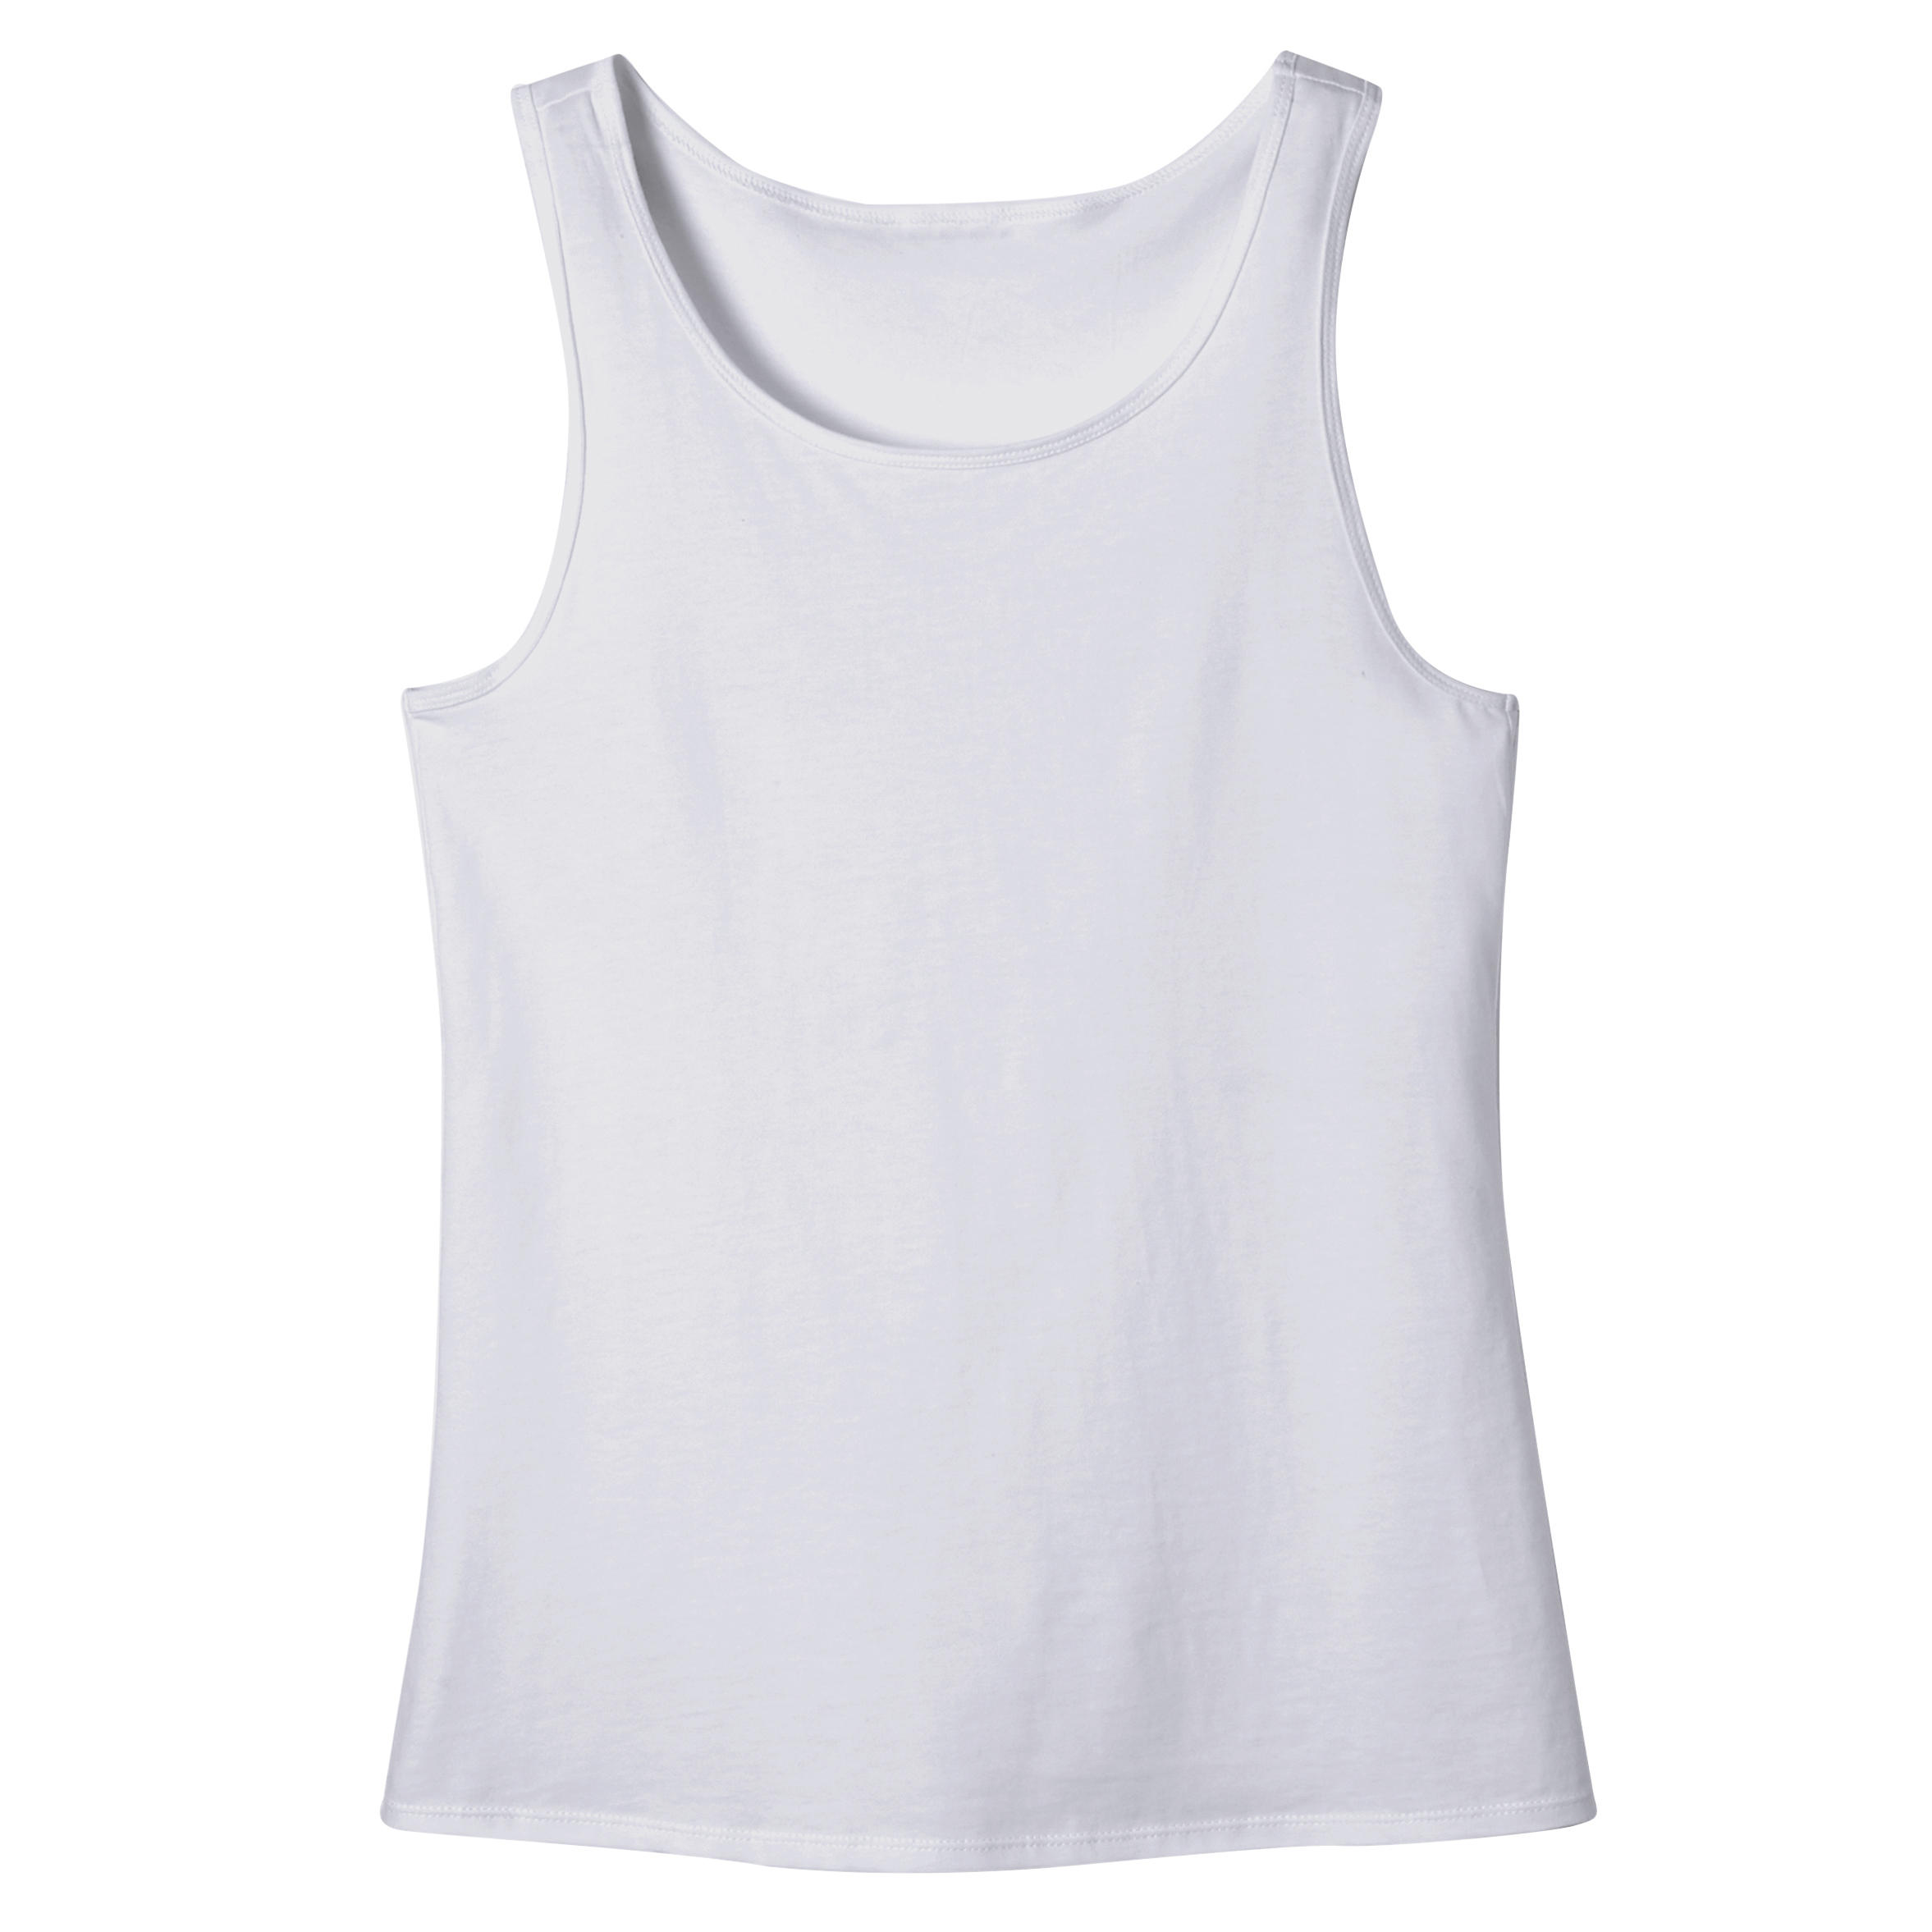 Women's Straight-Cut Crew Neck Cotton Fitness Tank Top 100 - Icy White 6/7